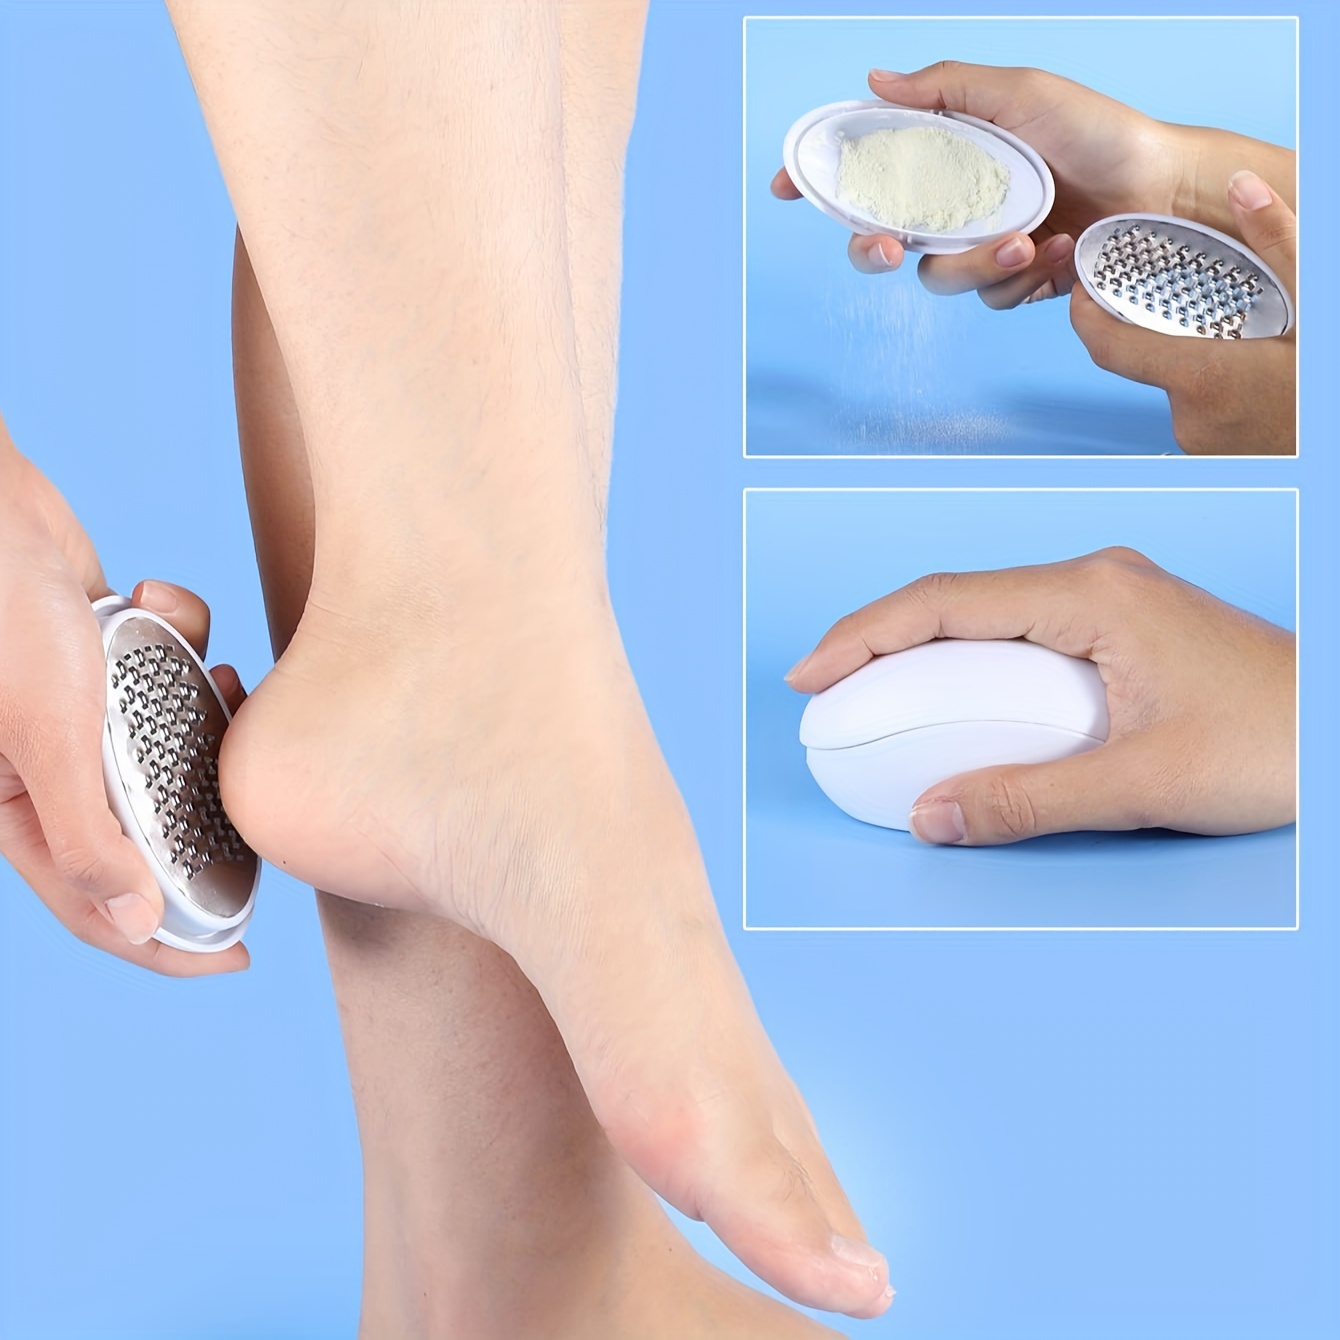 Foot File Ped Egg - Foot Care Tool - AliExpress